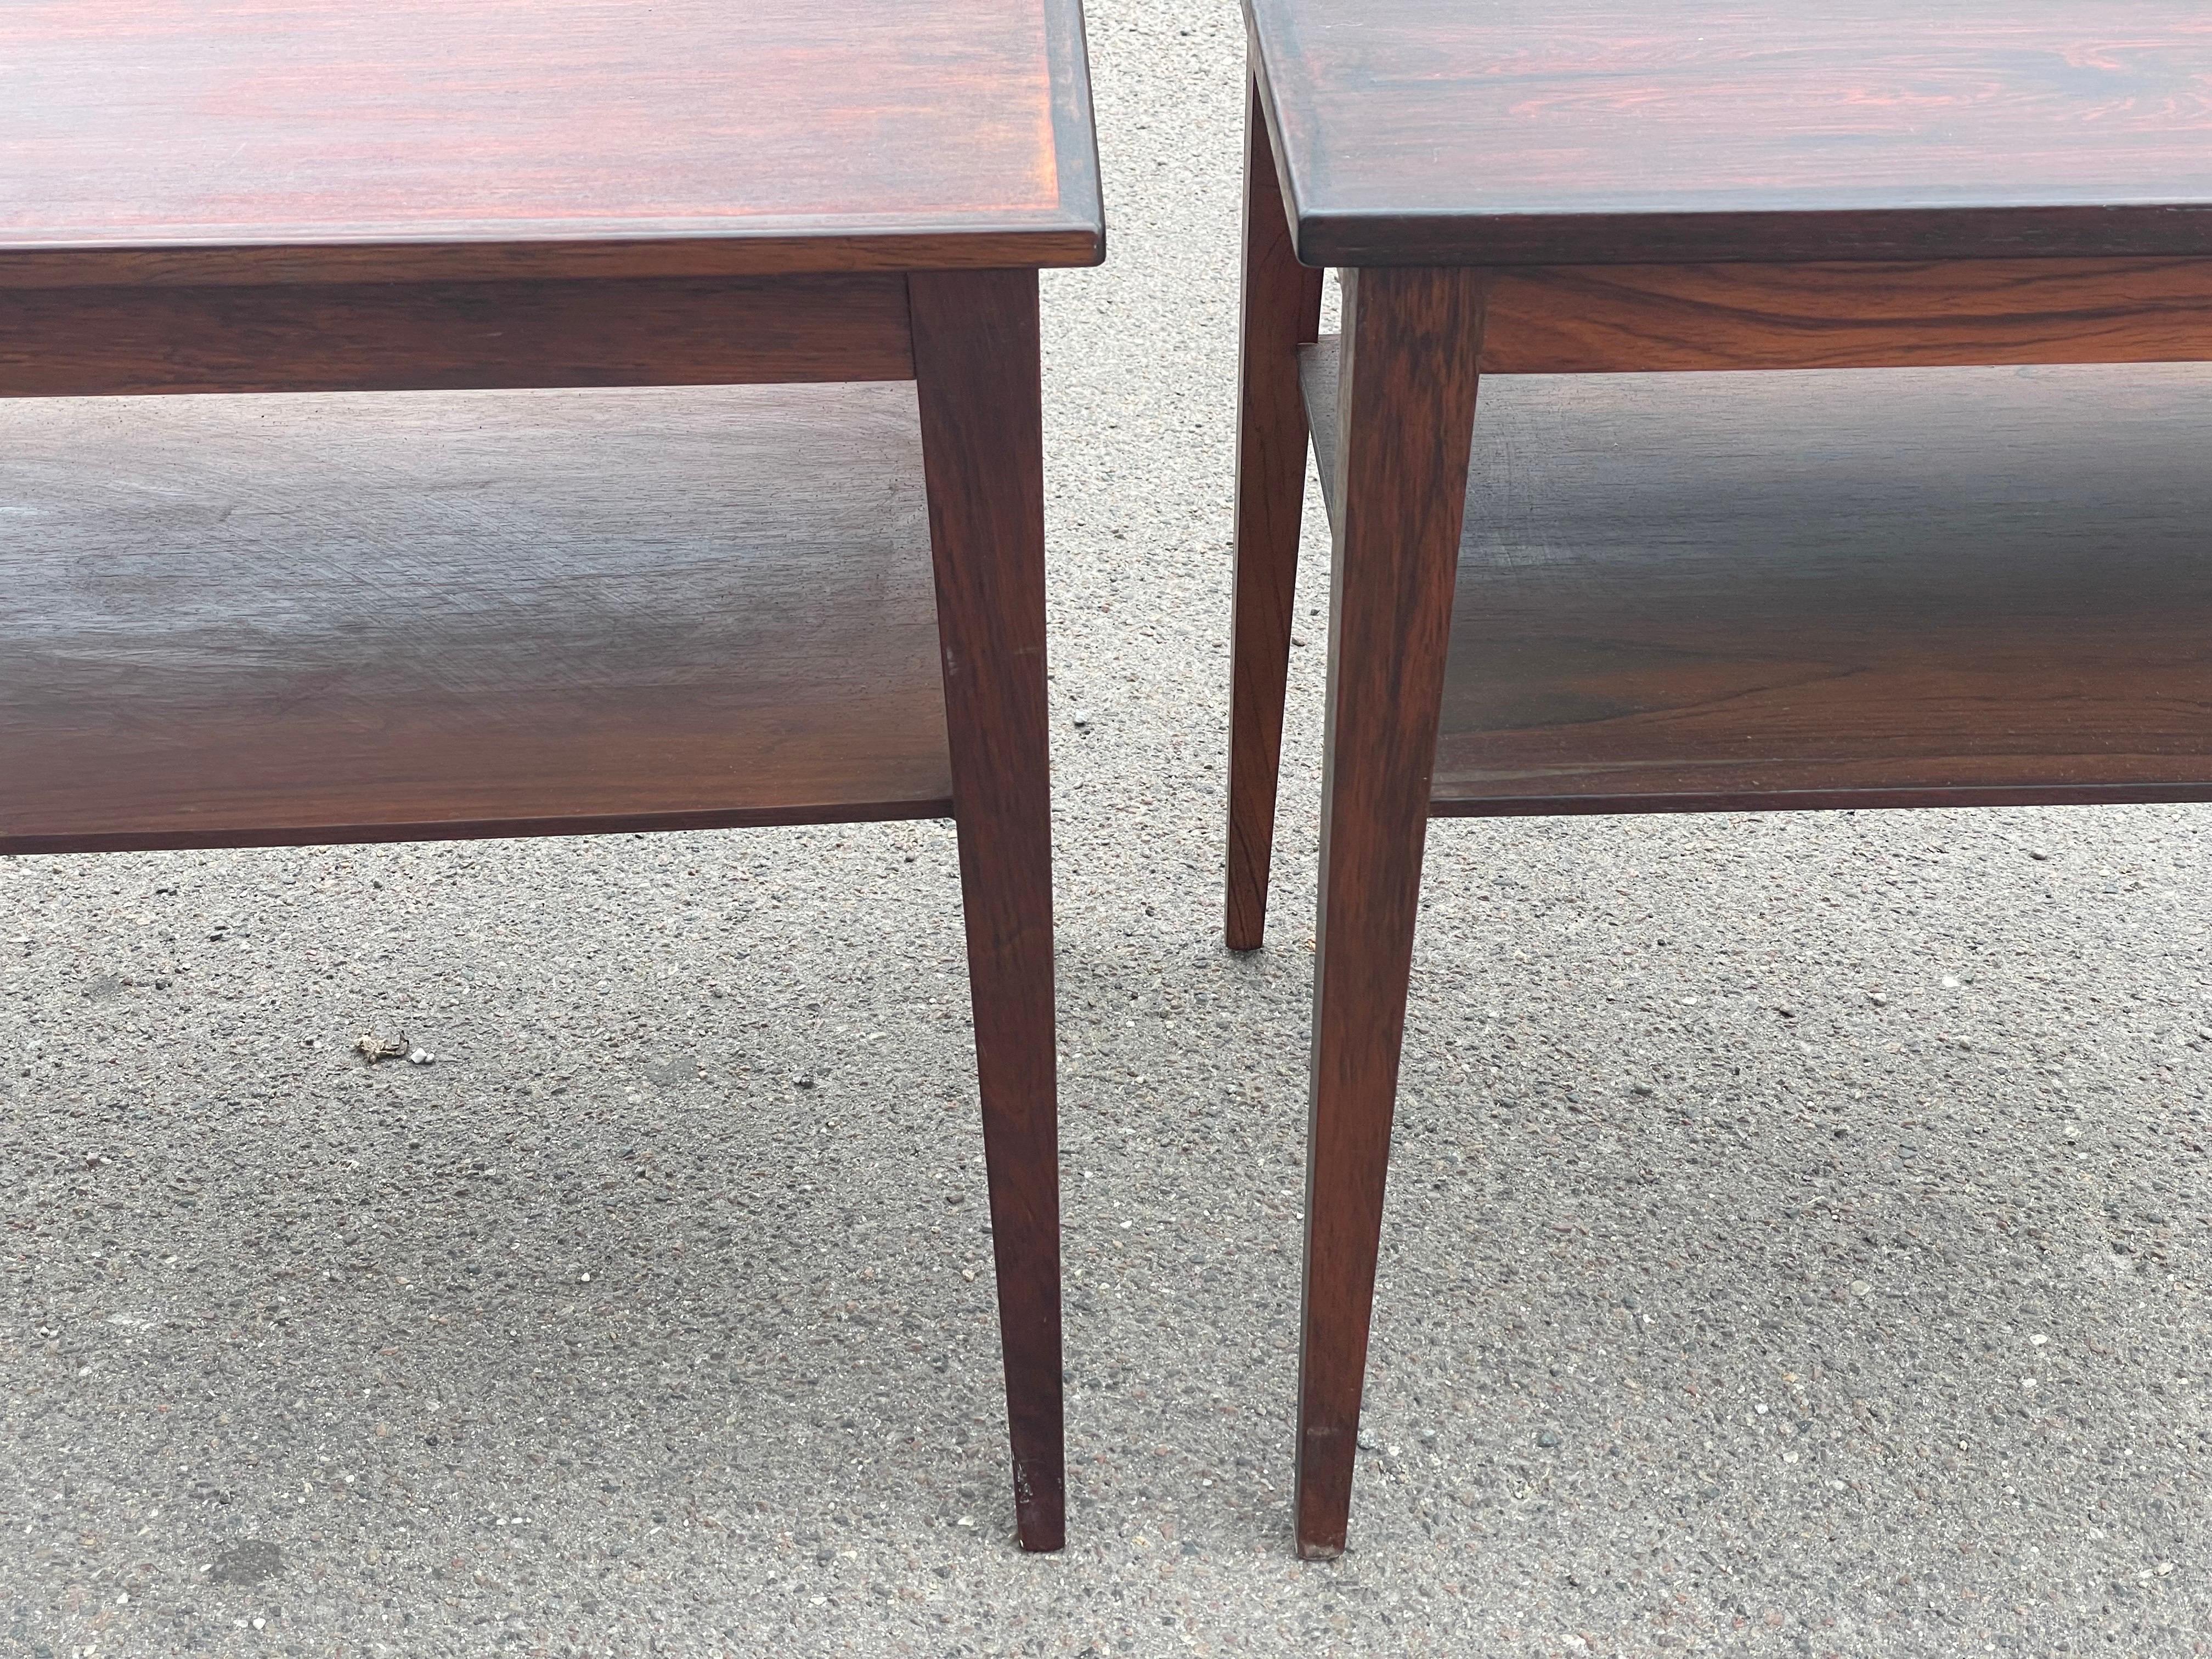 Pair of Danish Mid-Century Modern Nightstands or Sidetables from the, 1960s For Sale 1